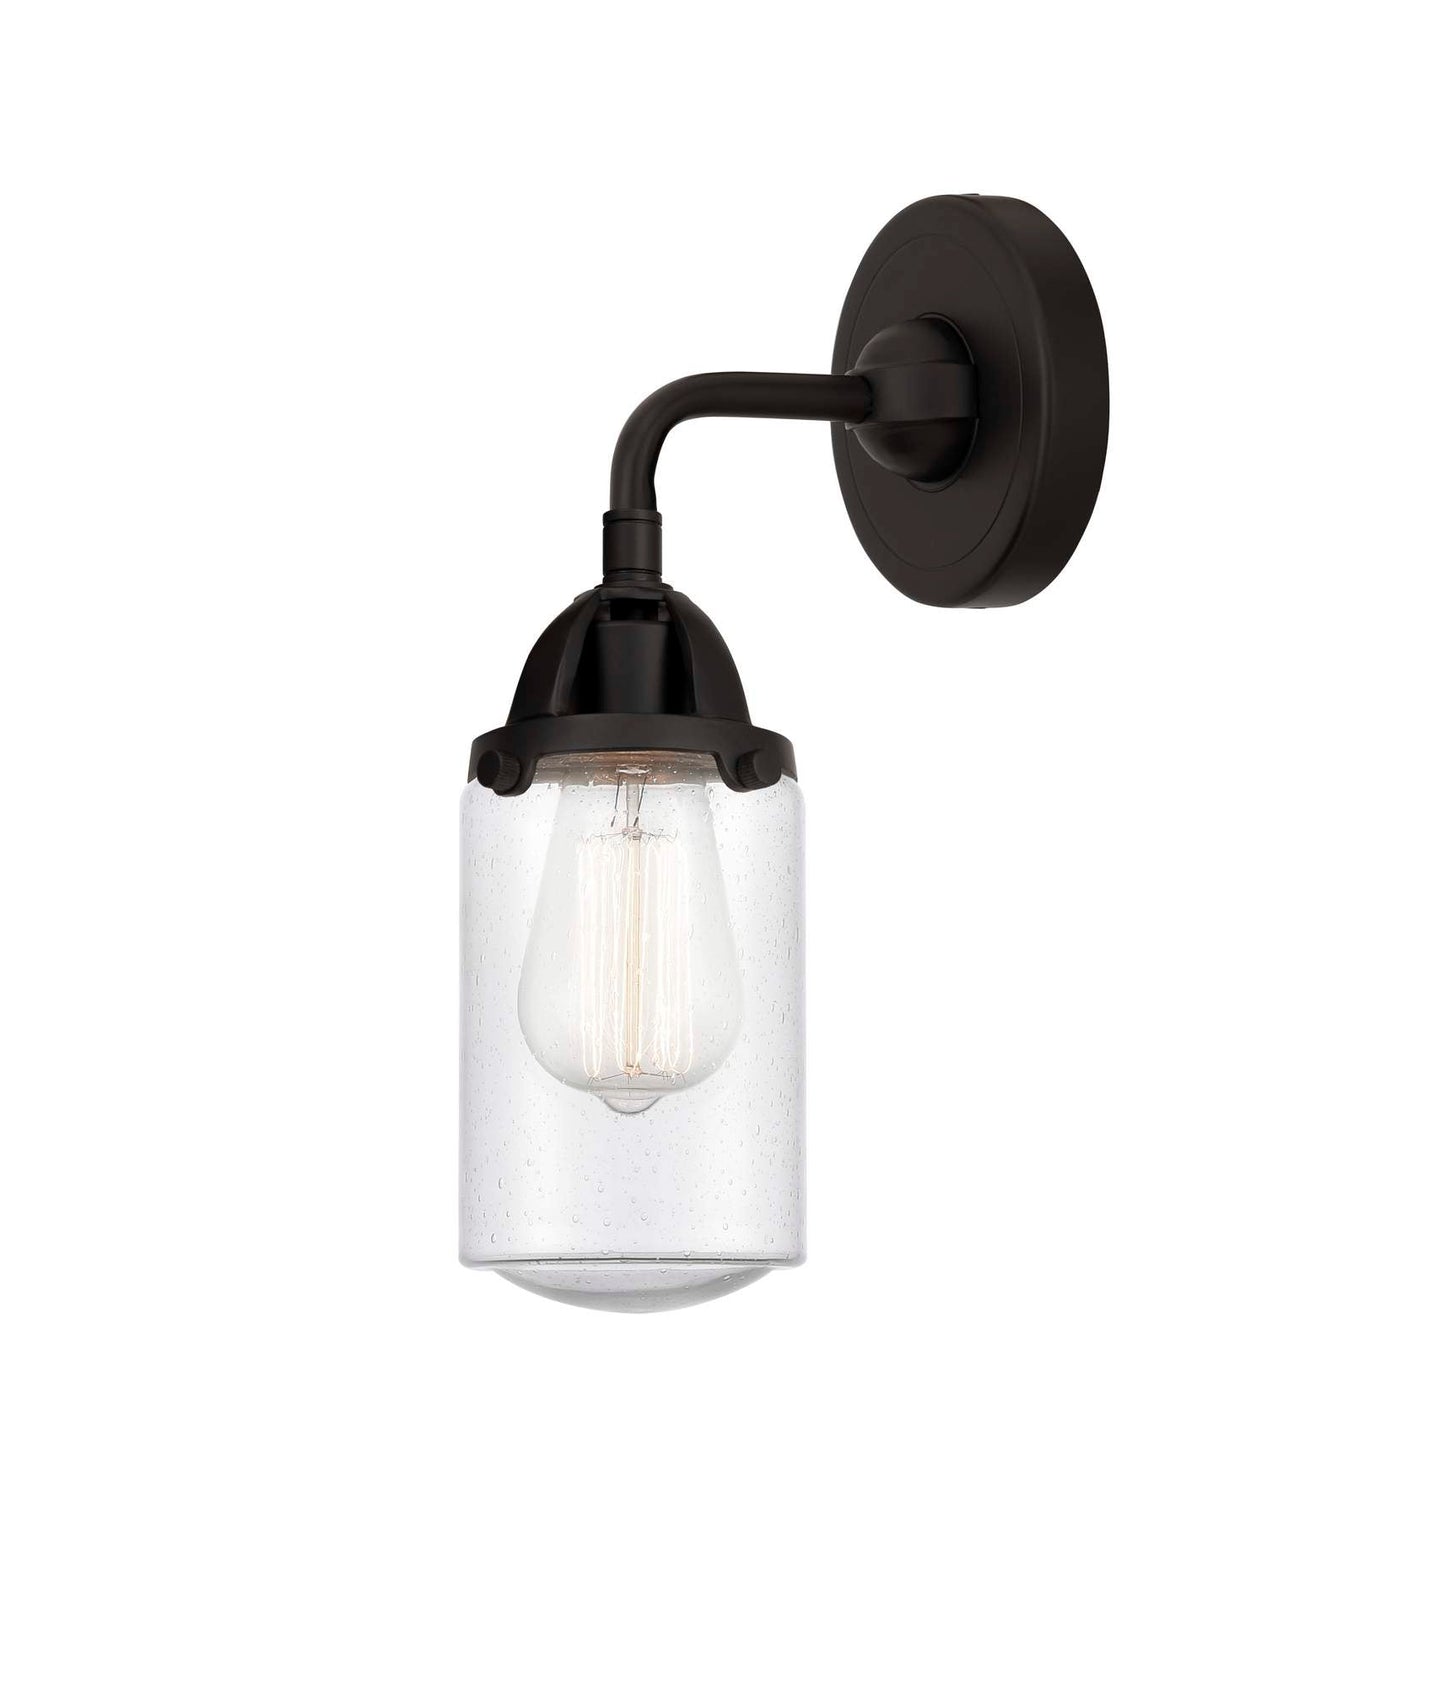 288-1W-BK-G314 1-Light 4.5" Matte Black Sconce - Seedy Dover Glass - LED Bulb - Dimmensions: 4.5 x 6.5 x 10.875 - Glass Up or Down: Yes